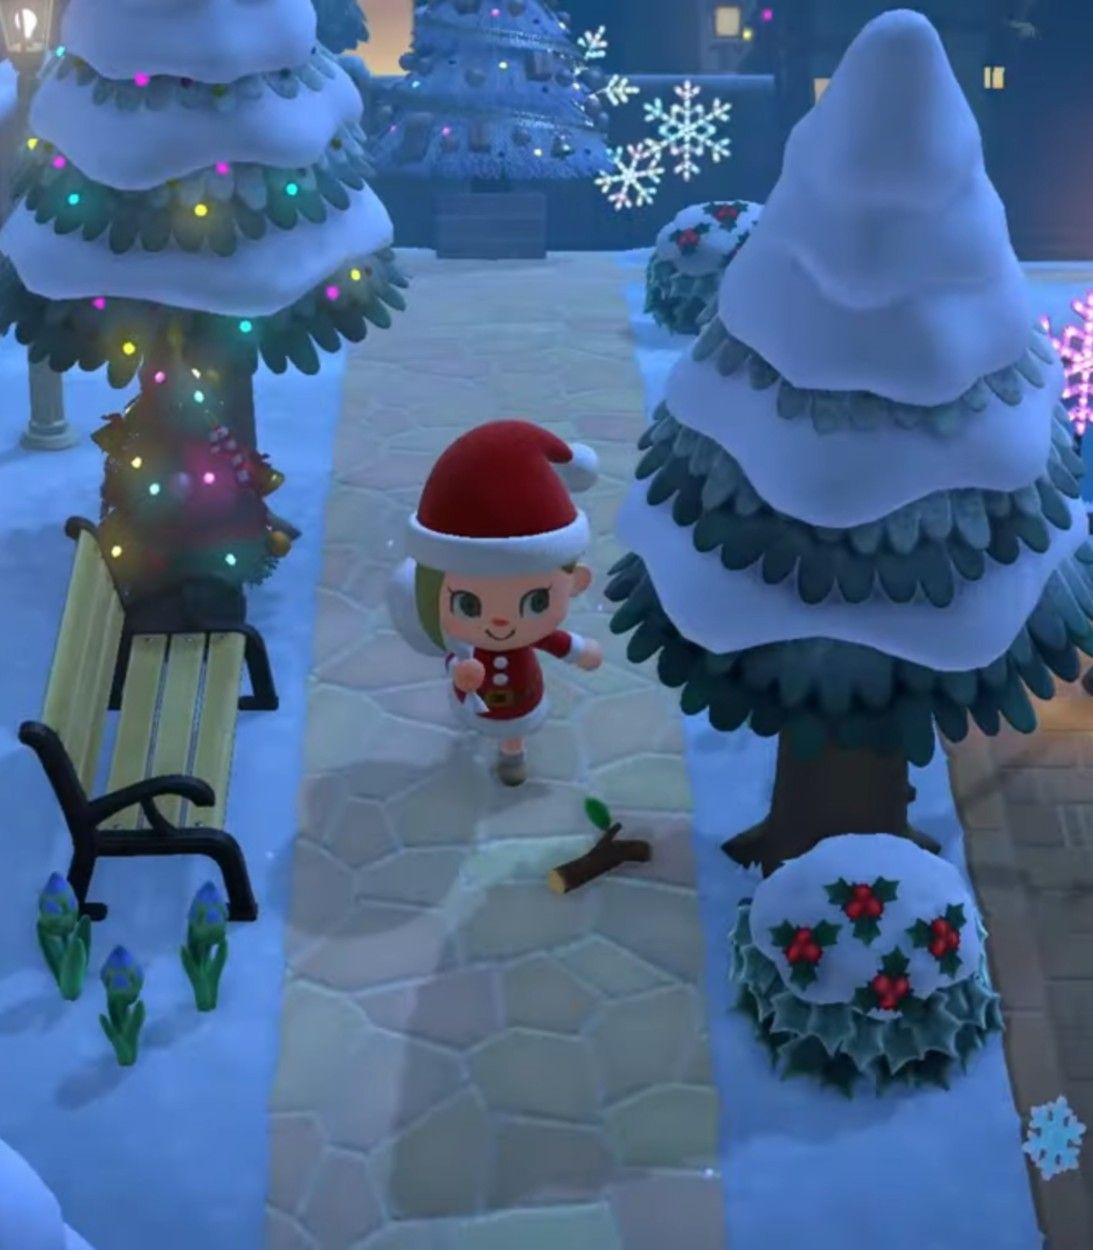 A player brings toys to her villagers on Toy Day in Animal Crossing: New Horizons